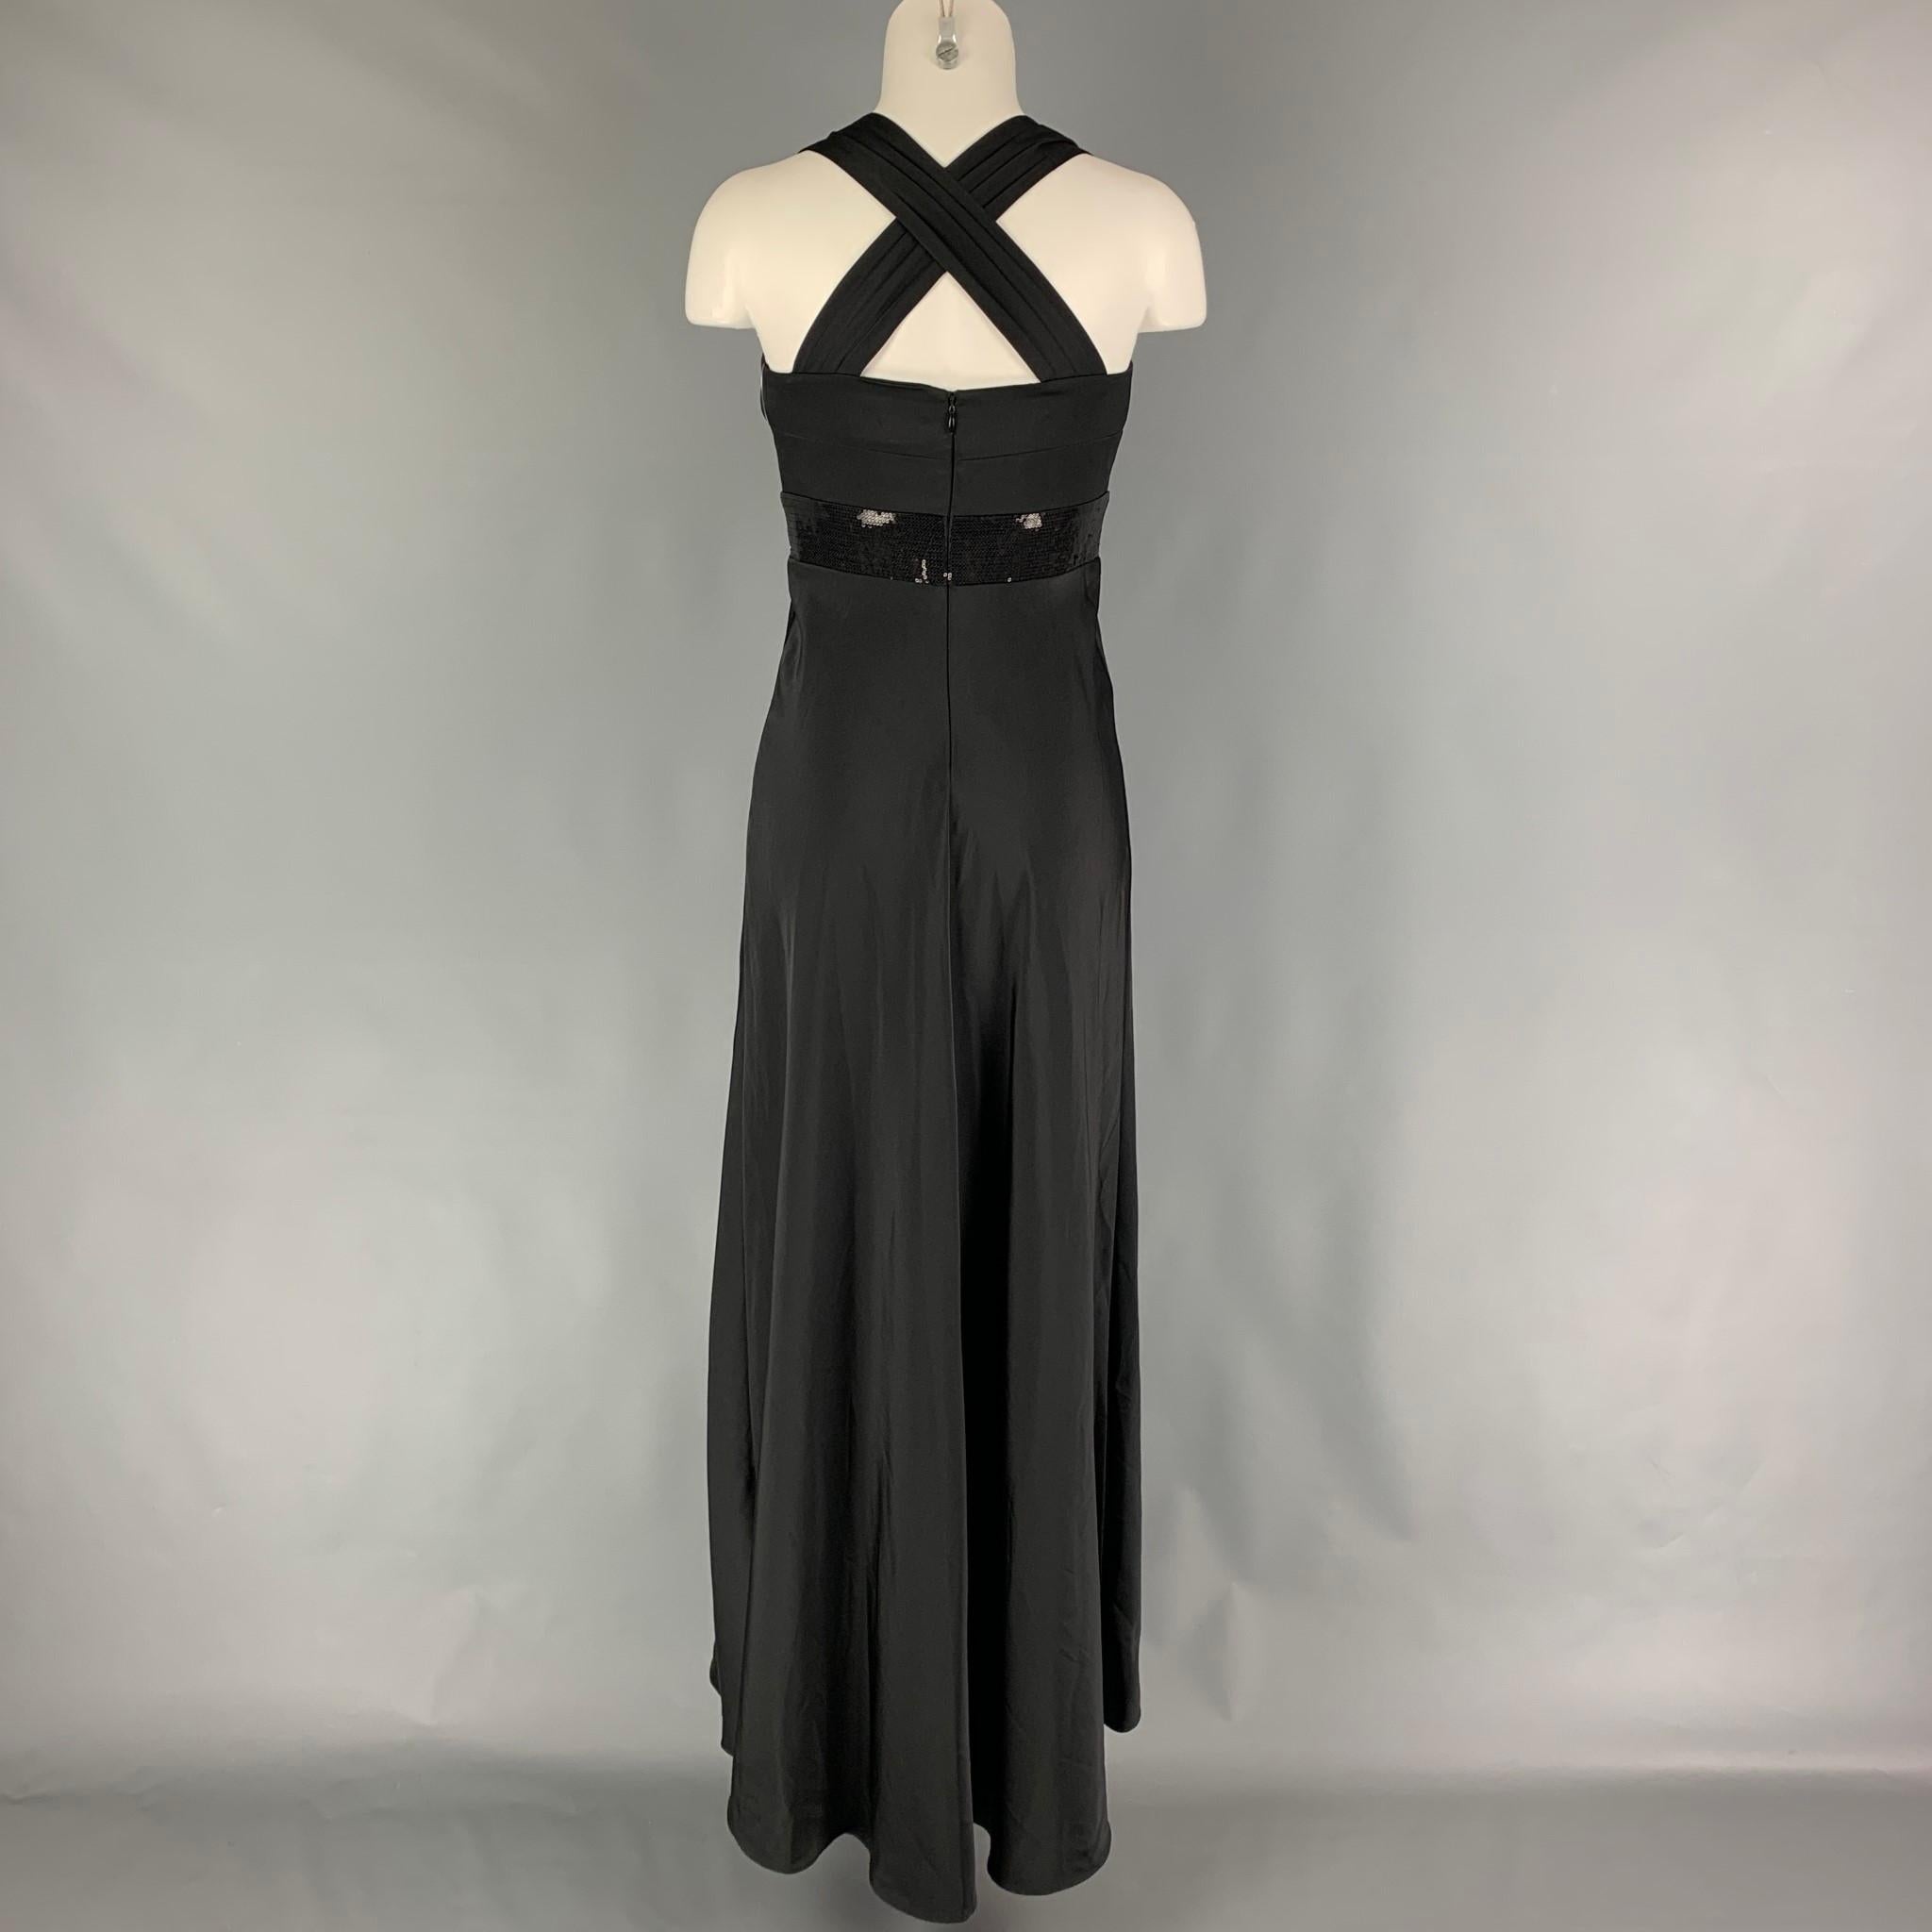 CALVIN KLEIN Size 2 Black Polyester Long Evening Gown 1